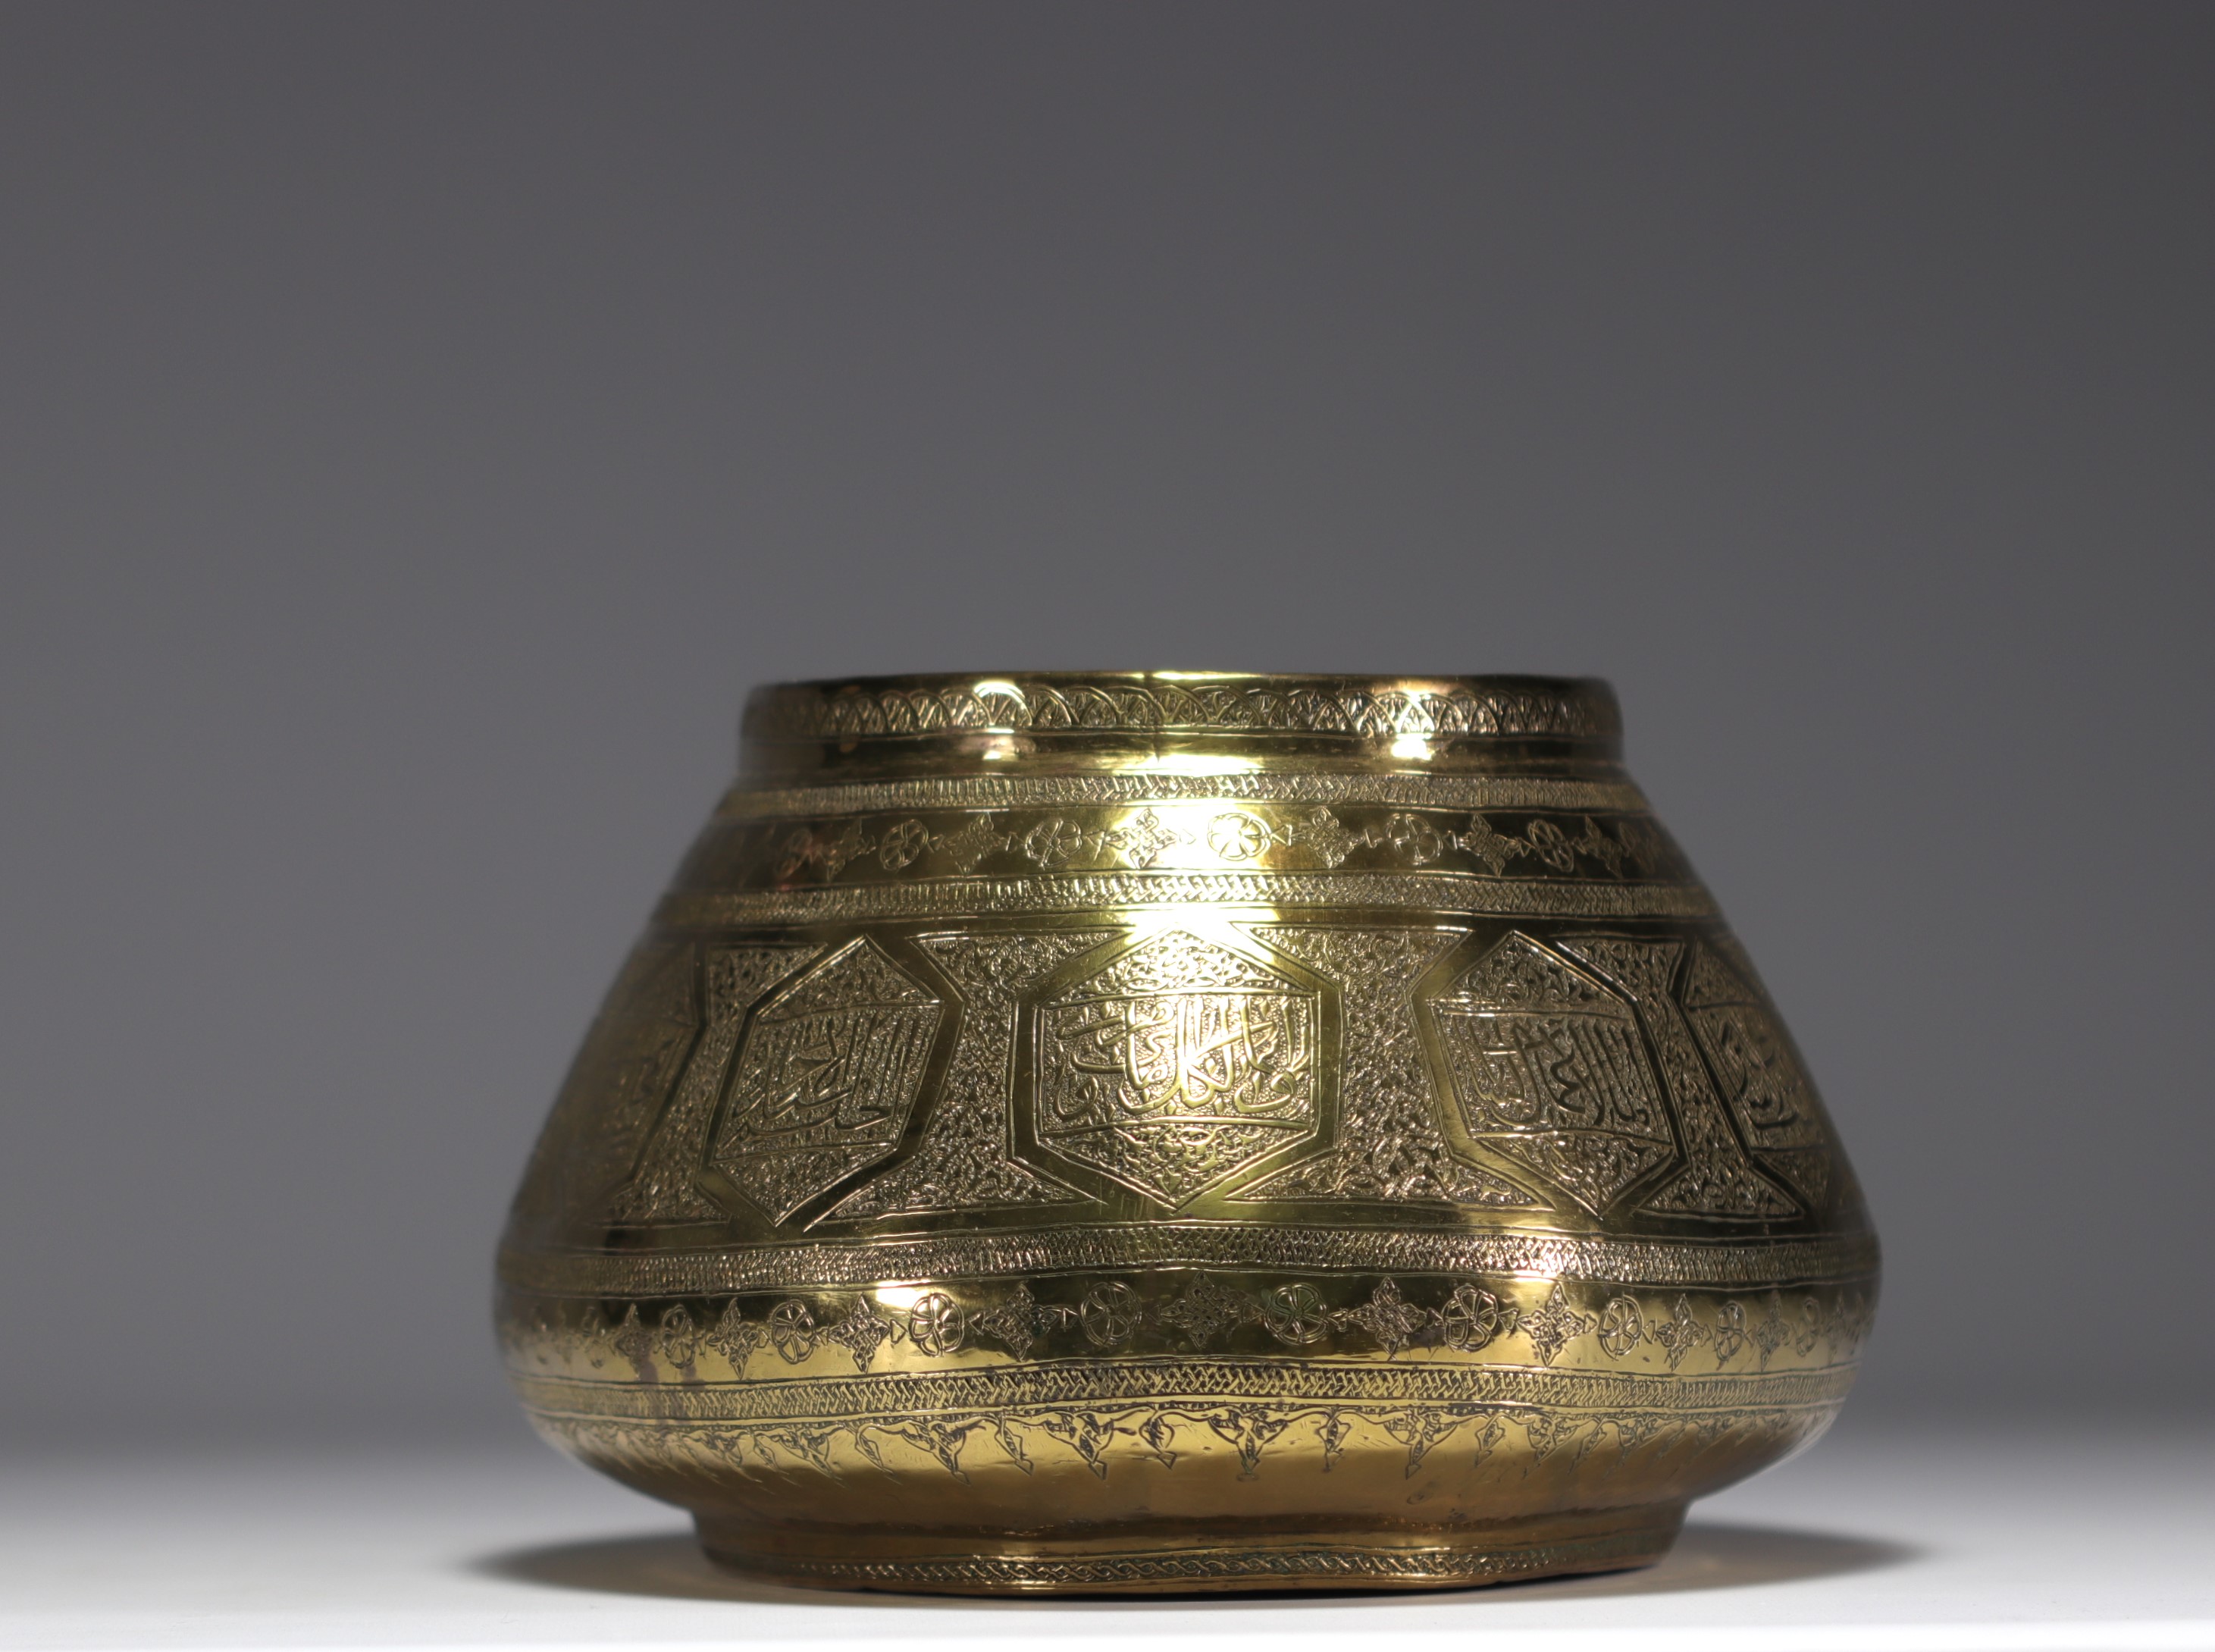 Iran - An old chased brass "Tas" basin decorated with flowers and wishes, 19th century. - Image 2 of 3